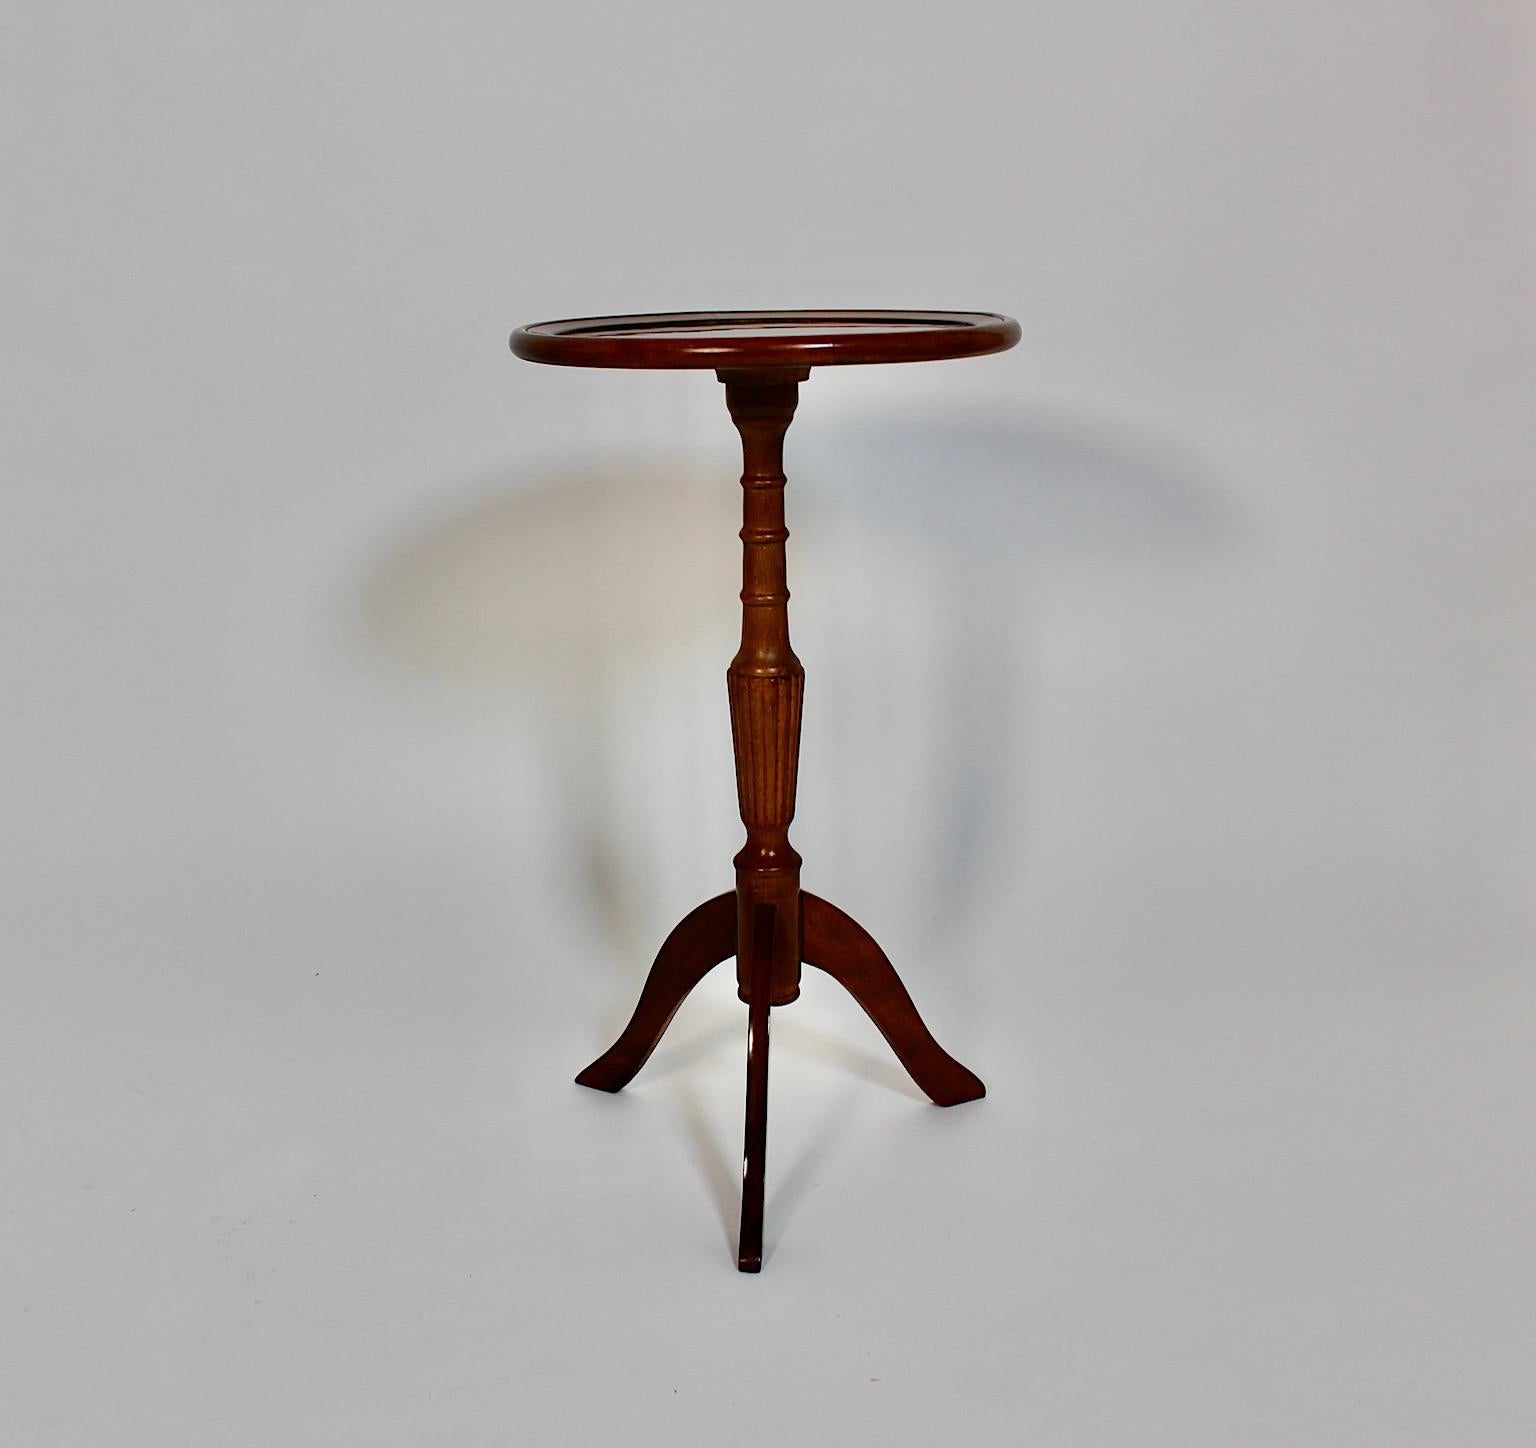 Modern Vintage Walnut Circular Side Table Turned Legs Italy 1970s For Sale 1